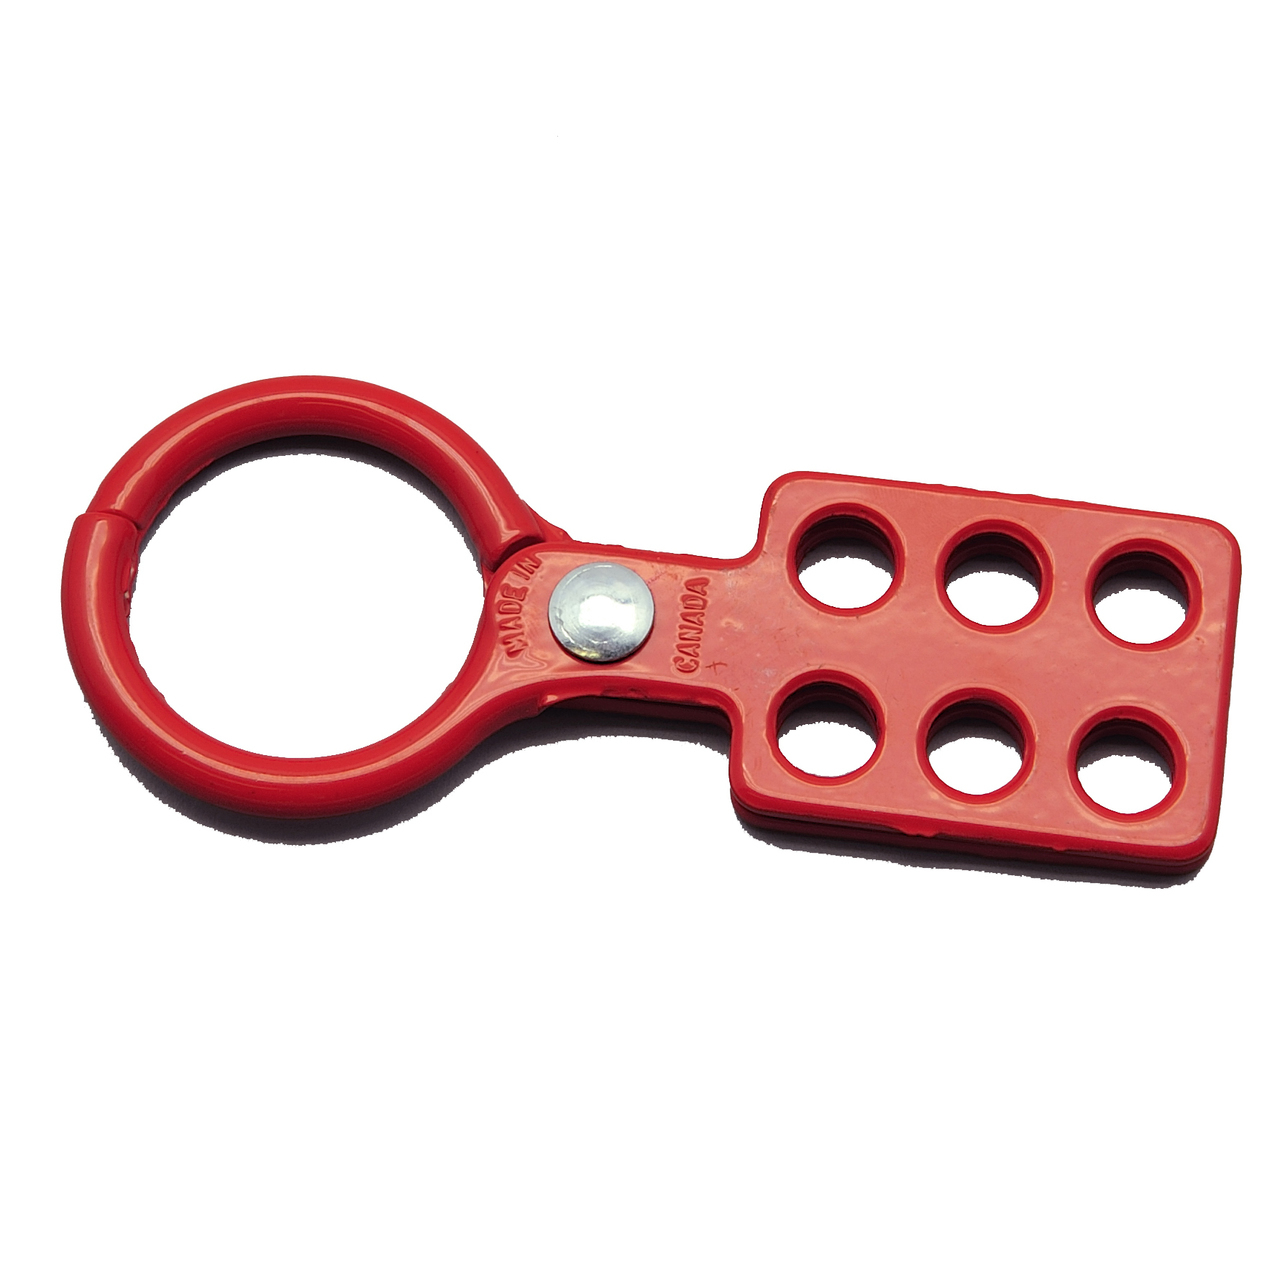 ZING RecycLockout Lockout Tagout Hasp, 1.5 Inch Recycled Aluminum